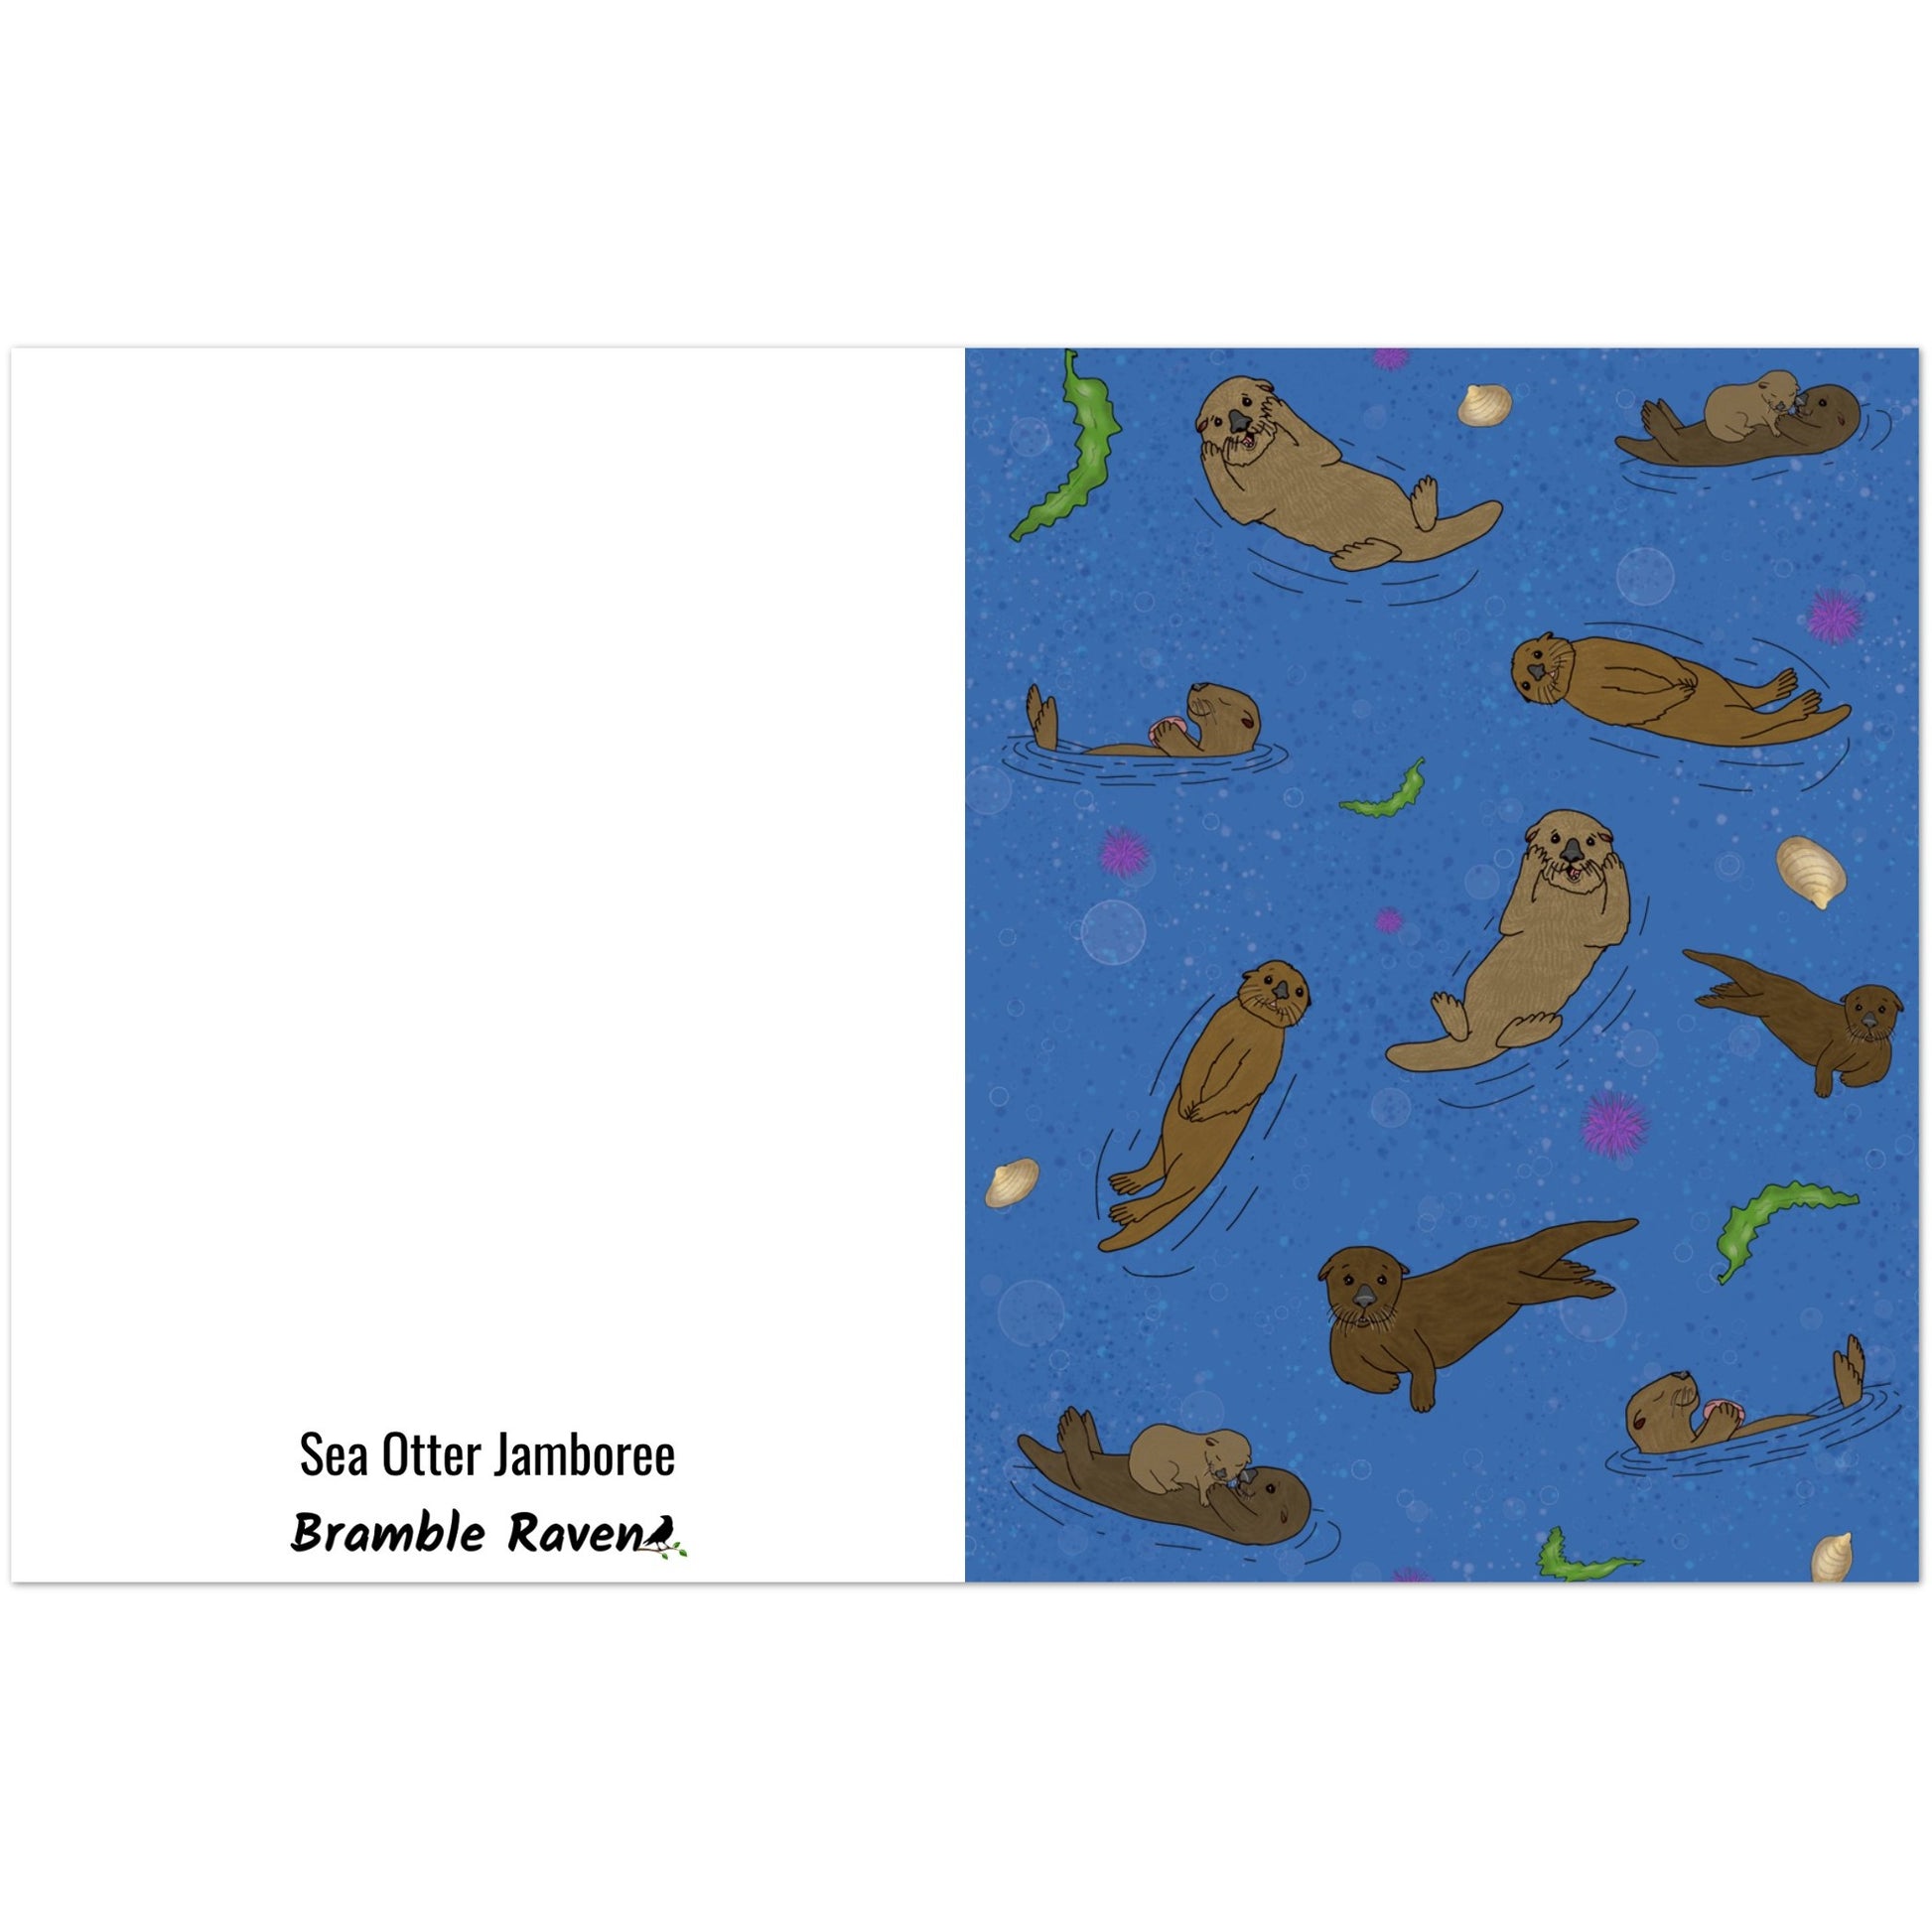 Pack of ten 4.25 x 5.5 inch greeting cards. Features illustrated sea otters on the front. Inside is blank. Made of coated paperboard. Comes with envelopes.